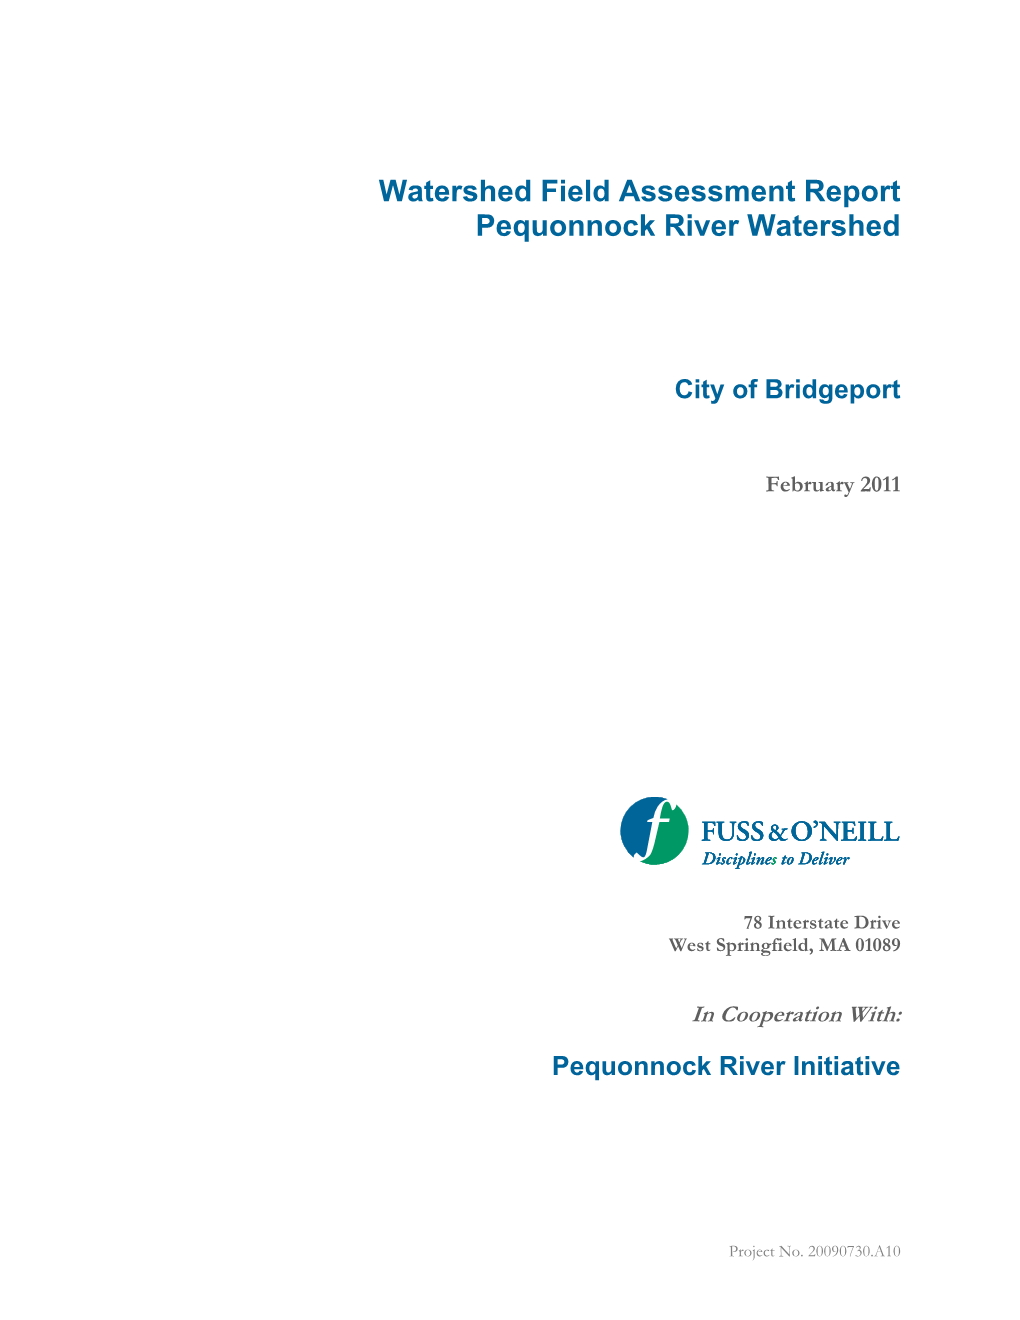 Watershed Field Assessment Report Pequonnock River Watershed